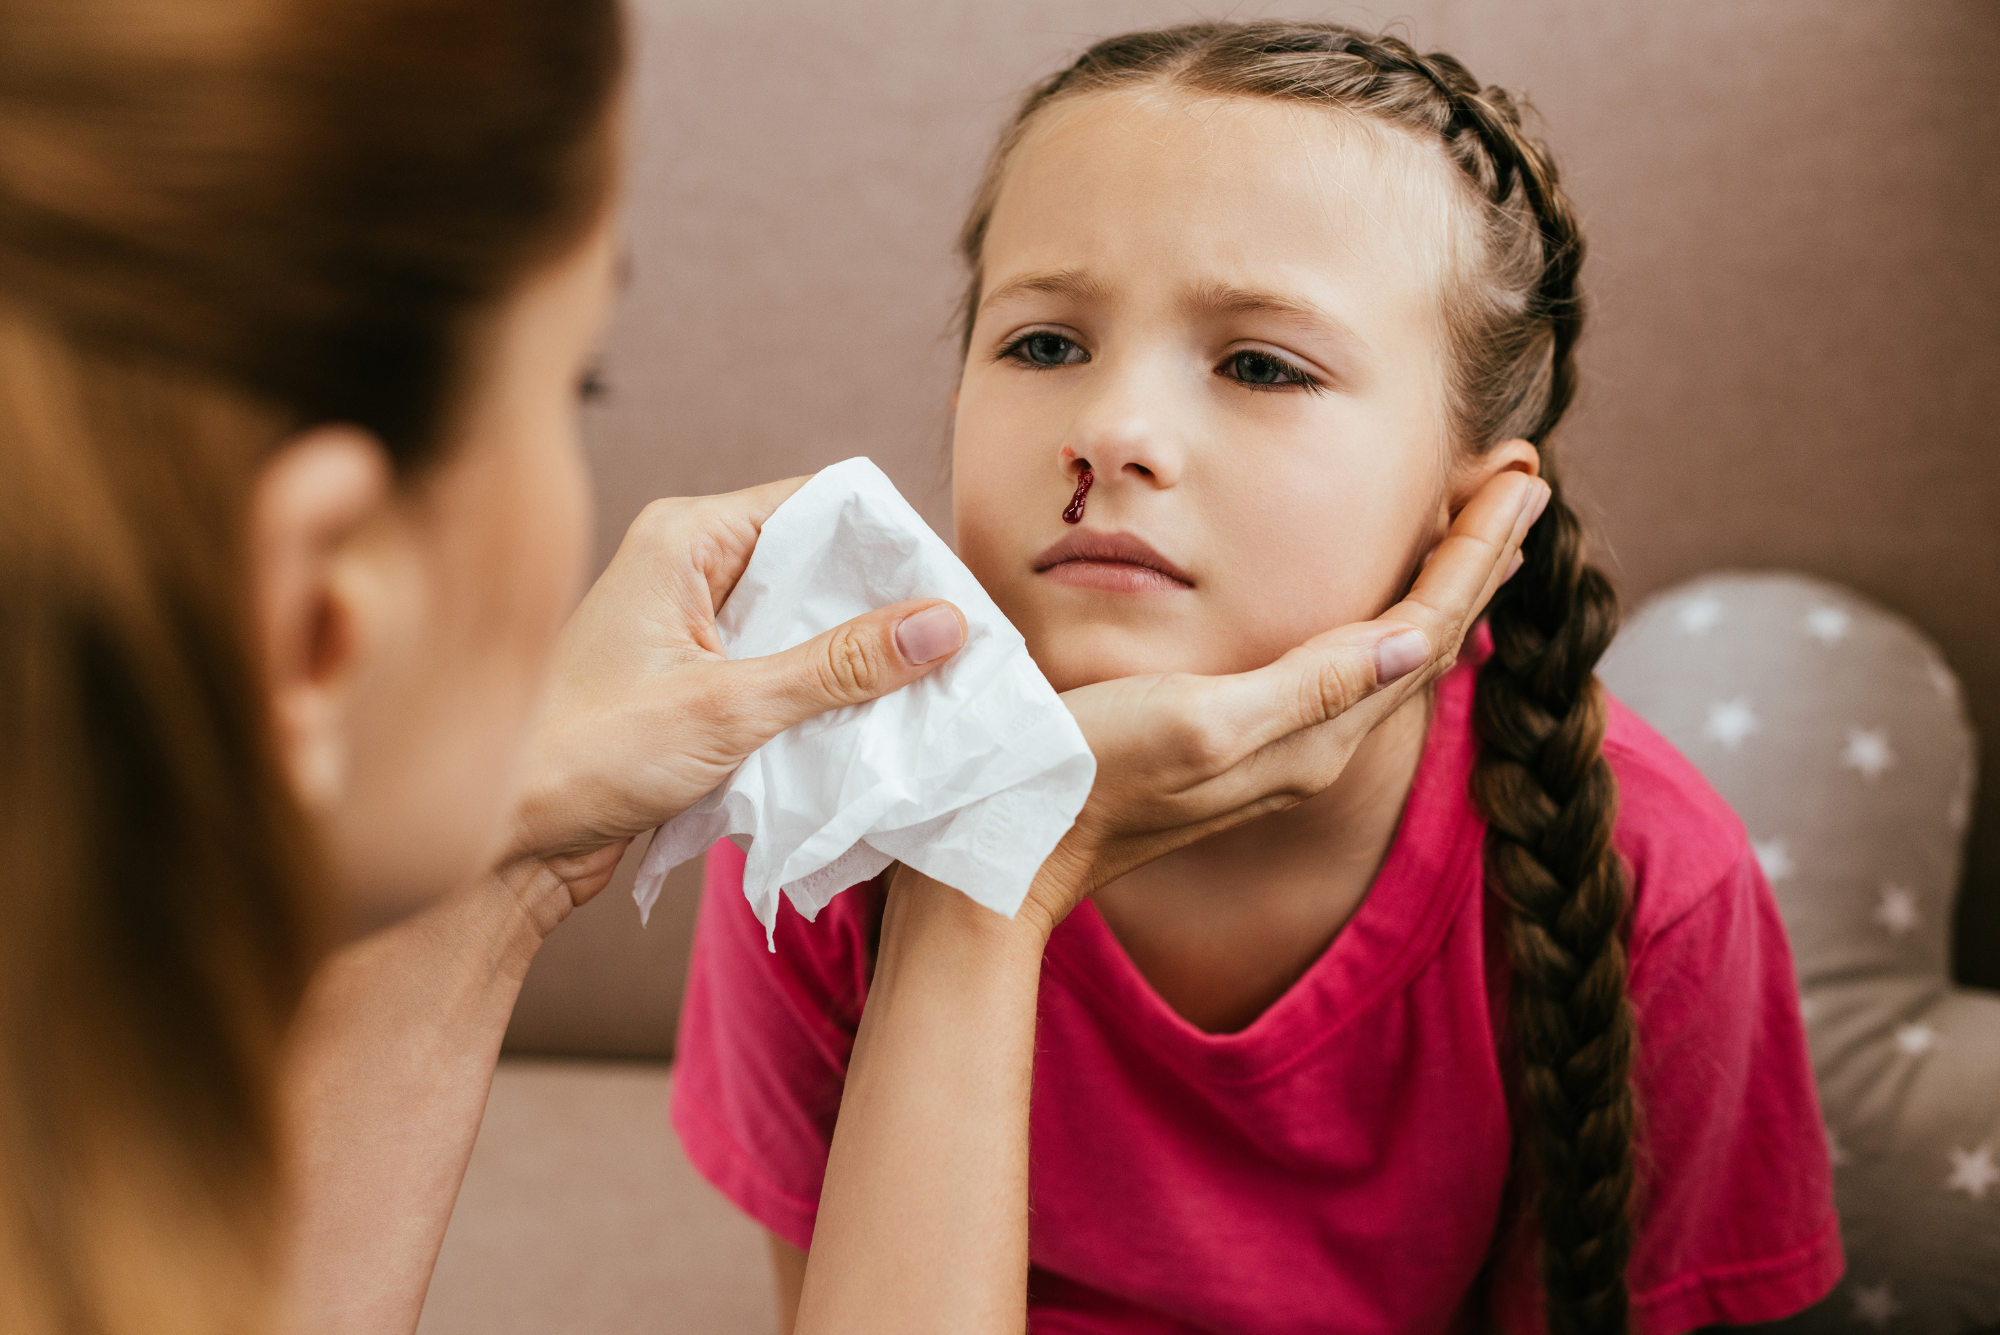 A little girl with chronic nose bleeds needs to get her nose cauterized, but for now has her nose wiped off by her mother.